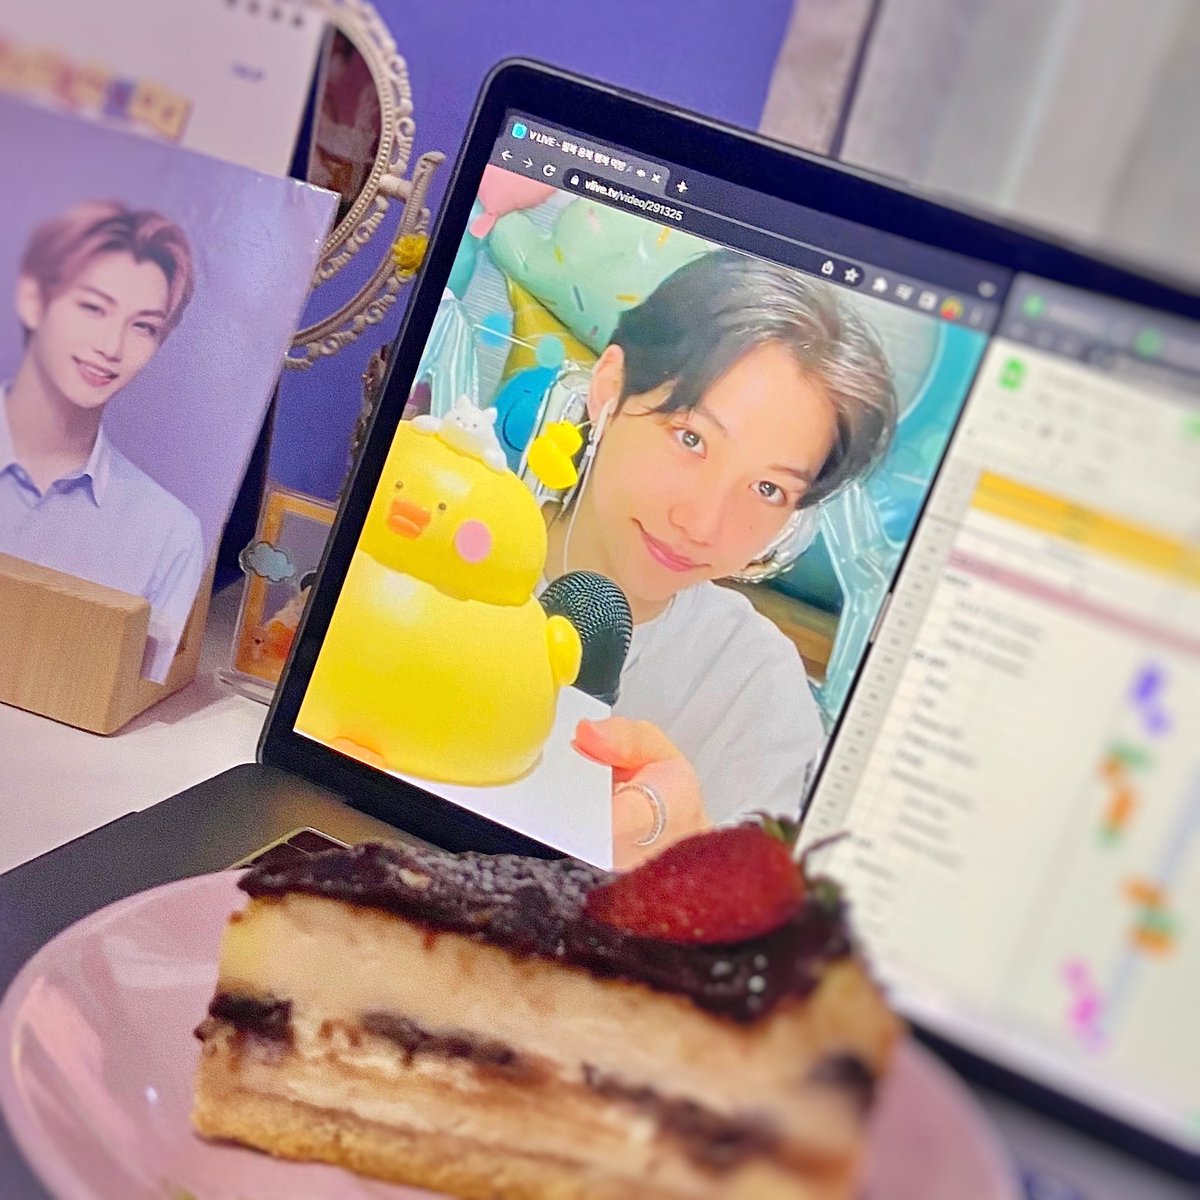 dear felix; was sad that i couldn’t celebrate today properly but that’s where ur role come in— u r the happiness that keeps on reminding me to take things in life easy. my safe place, epitome of love, happy bday ♡

#스물셋_나의햇살_필릭스
#OurBrightSunFelixDay
#HappyFelixDay